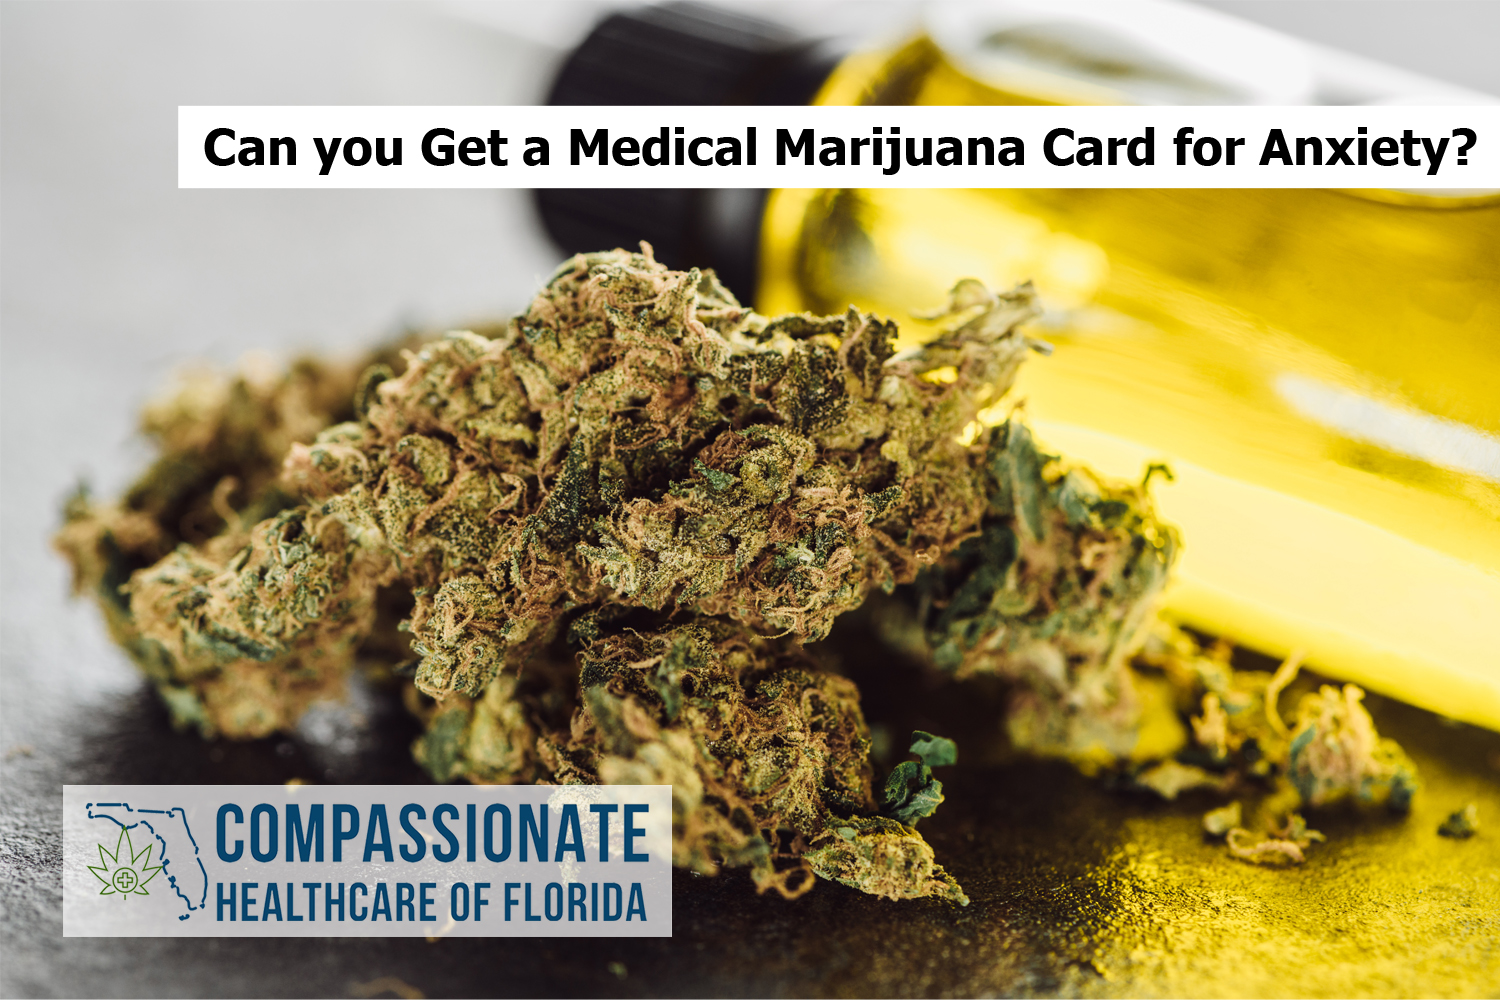 Can you Get a Medical Marijuana Card for Anxiety?